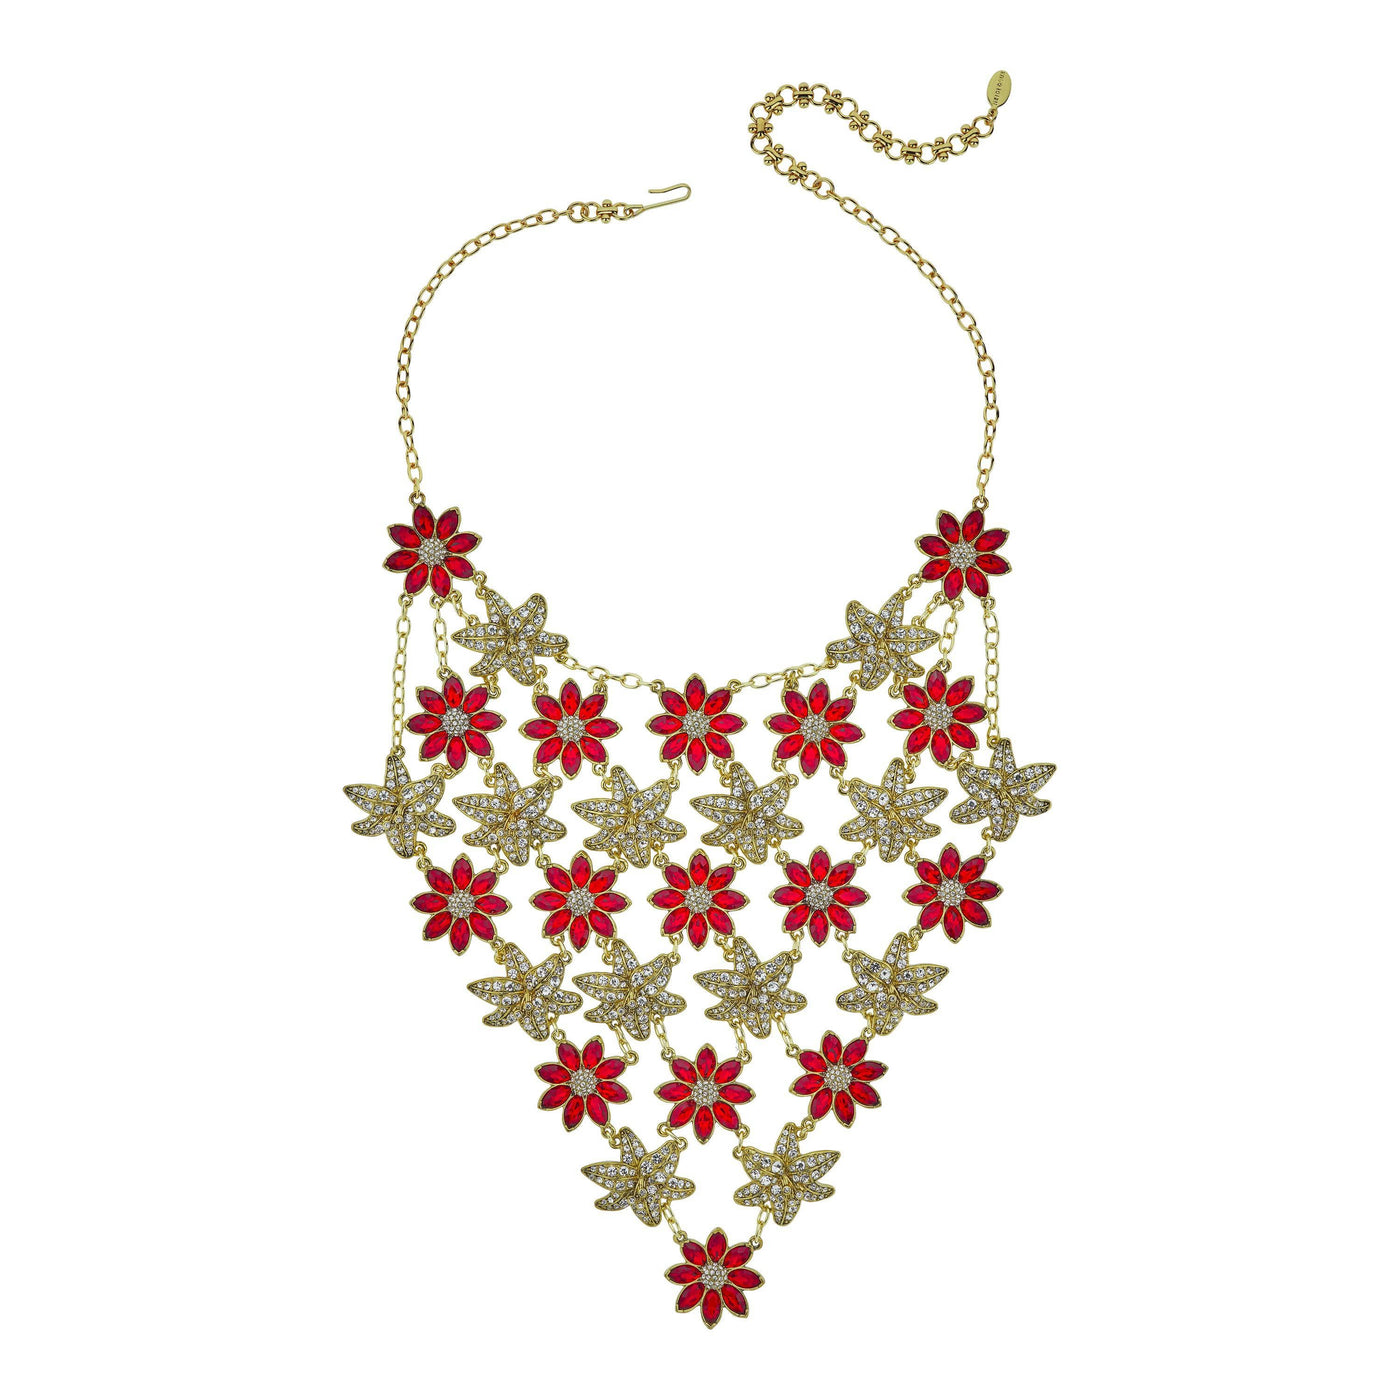 HEIDI DAUS® "A-Mazing Venice" Crystal & Chain Floral Necklace